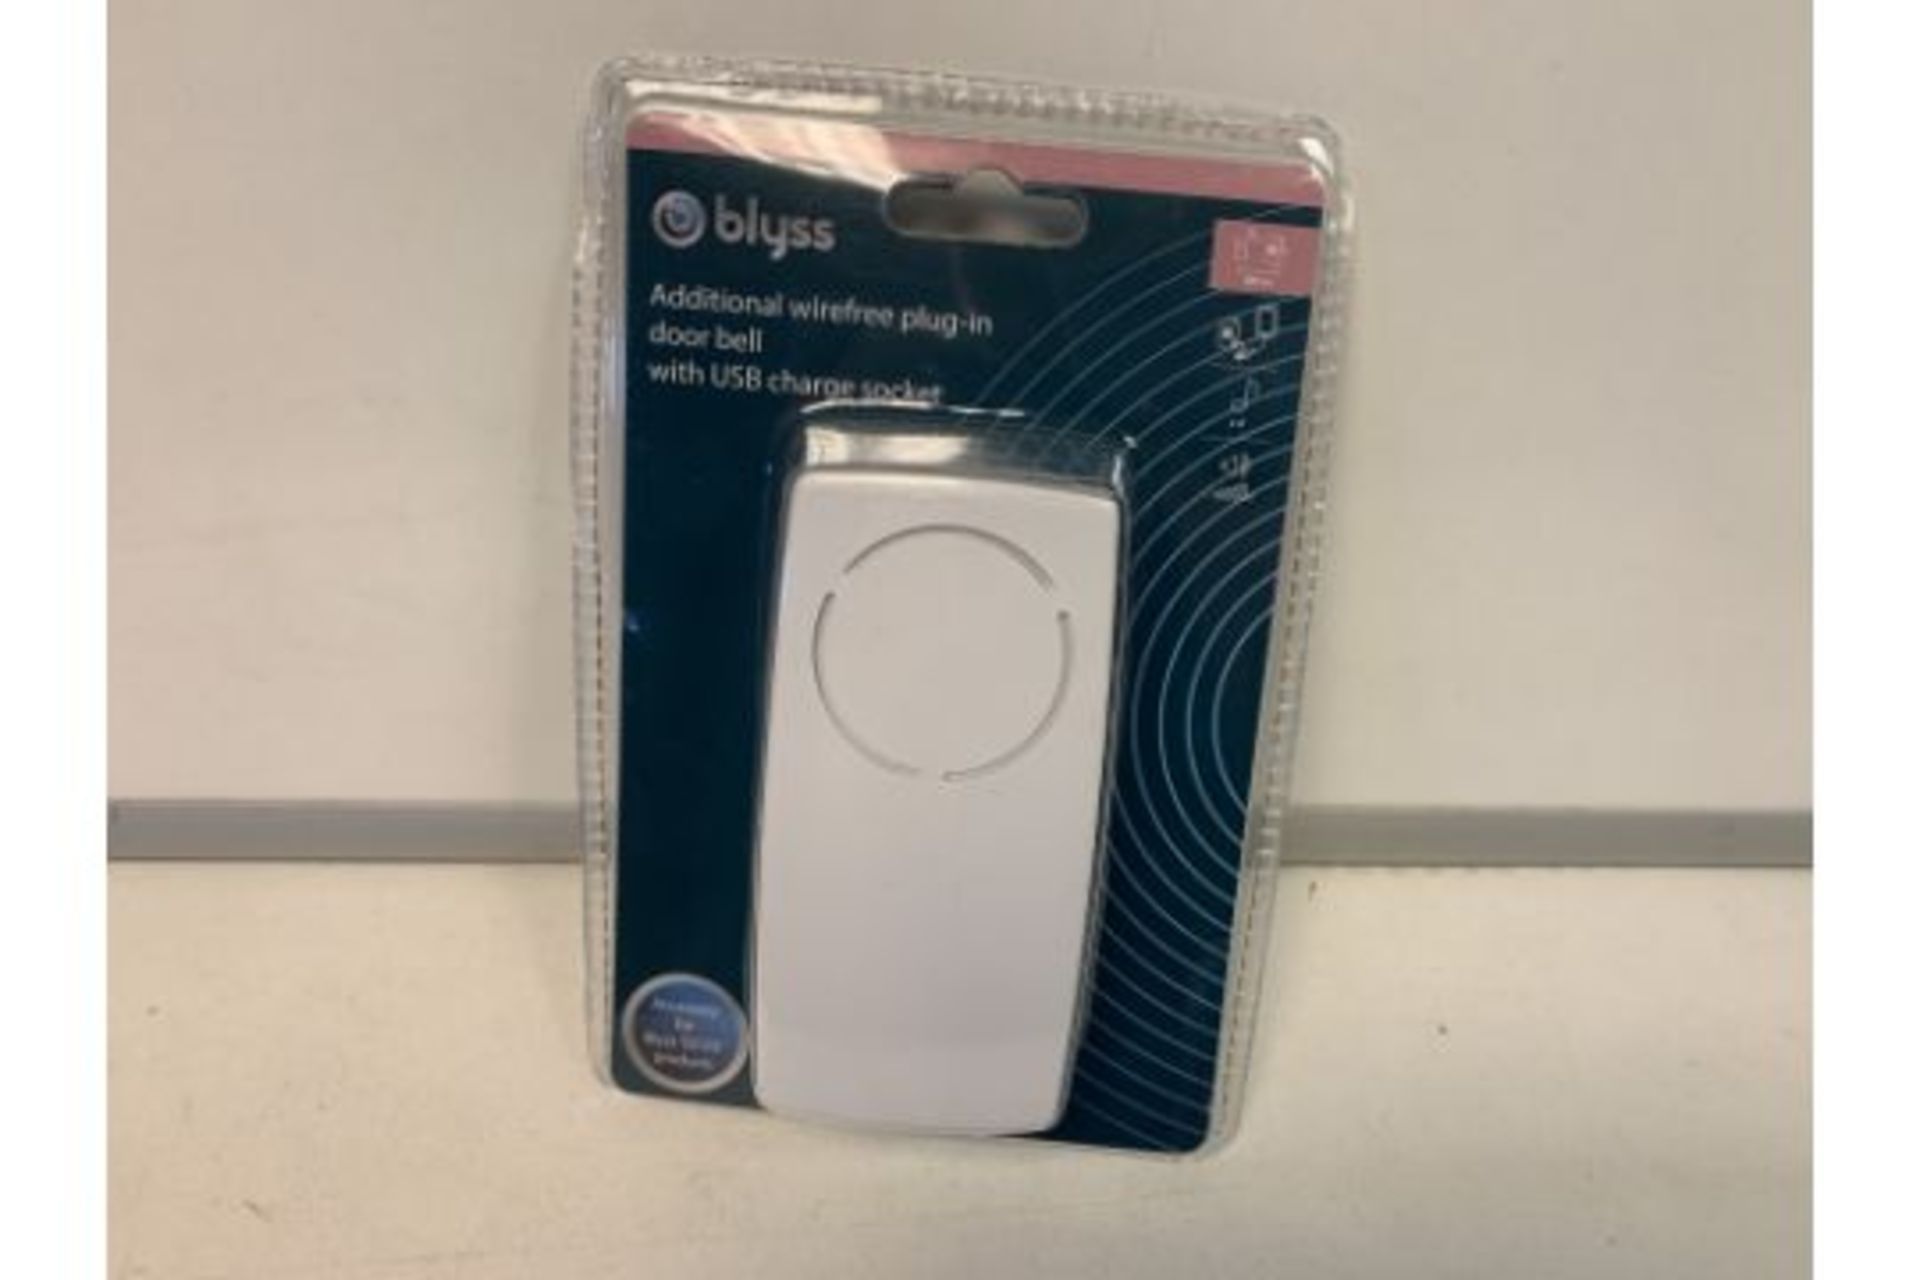 36 X NEW PACKAGED BLYSS ADDITIONAL WIREFREE PLUG IN DOOR BELL WITH USB CHARGE SOCKET (1382/3)